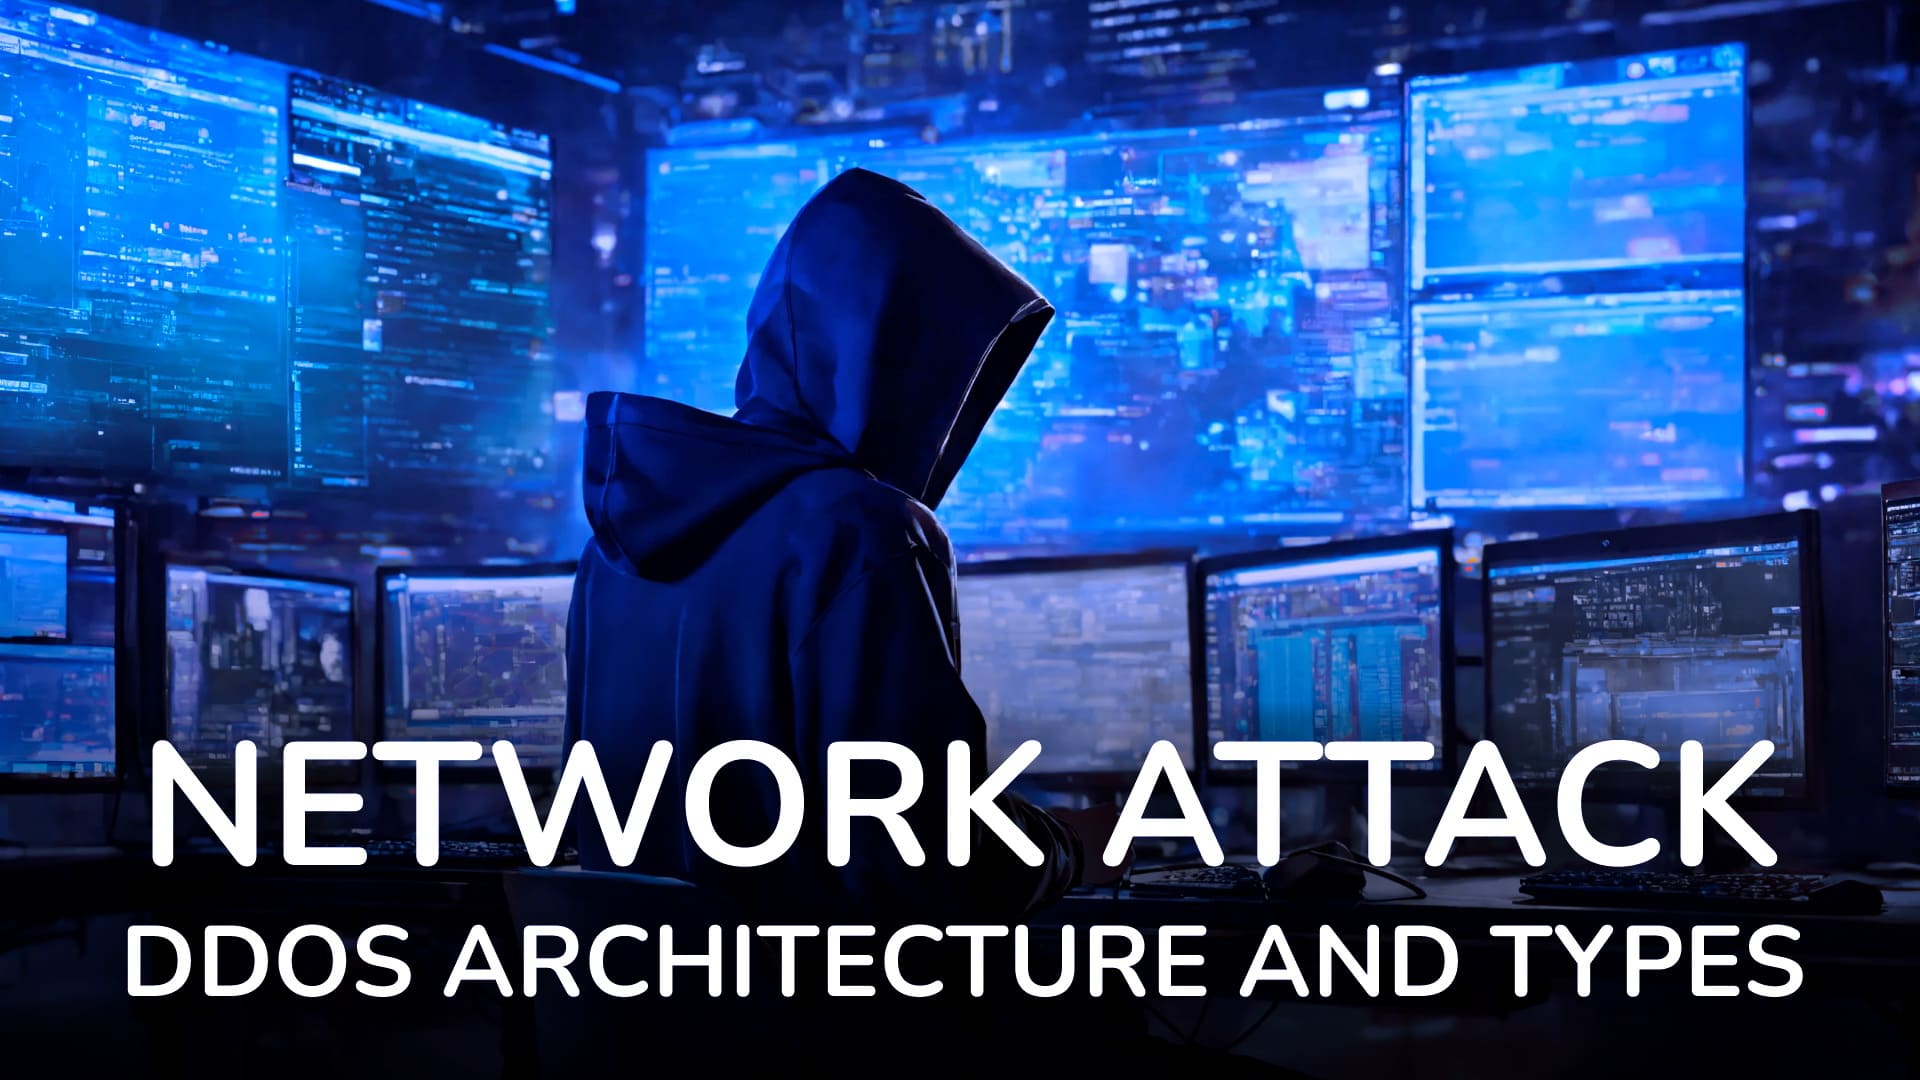 Network attack architecture and types - MAXSTRESSER